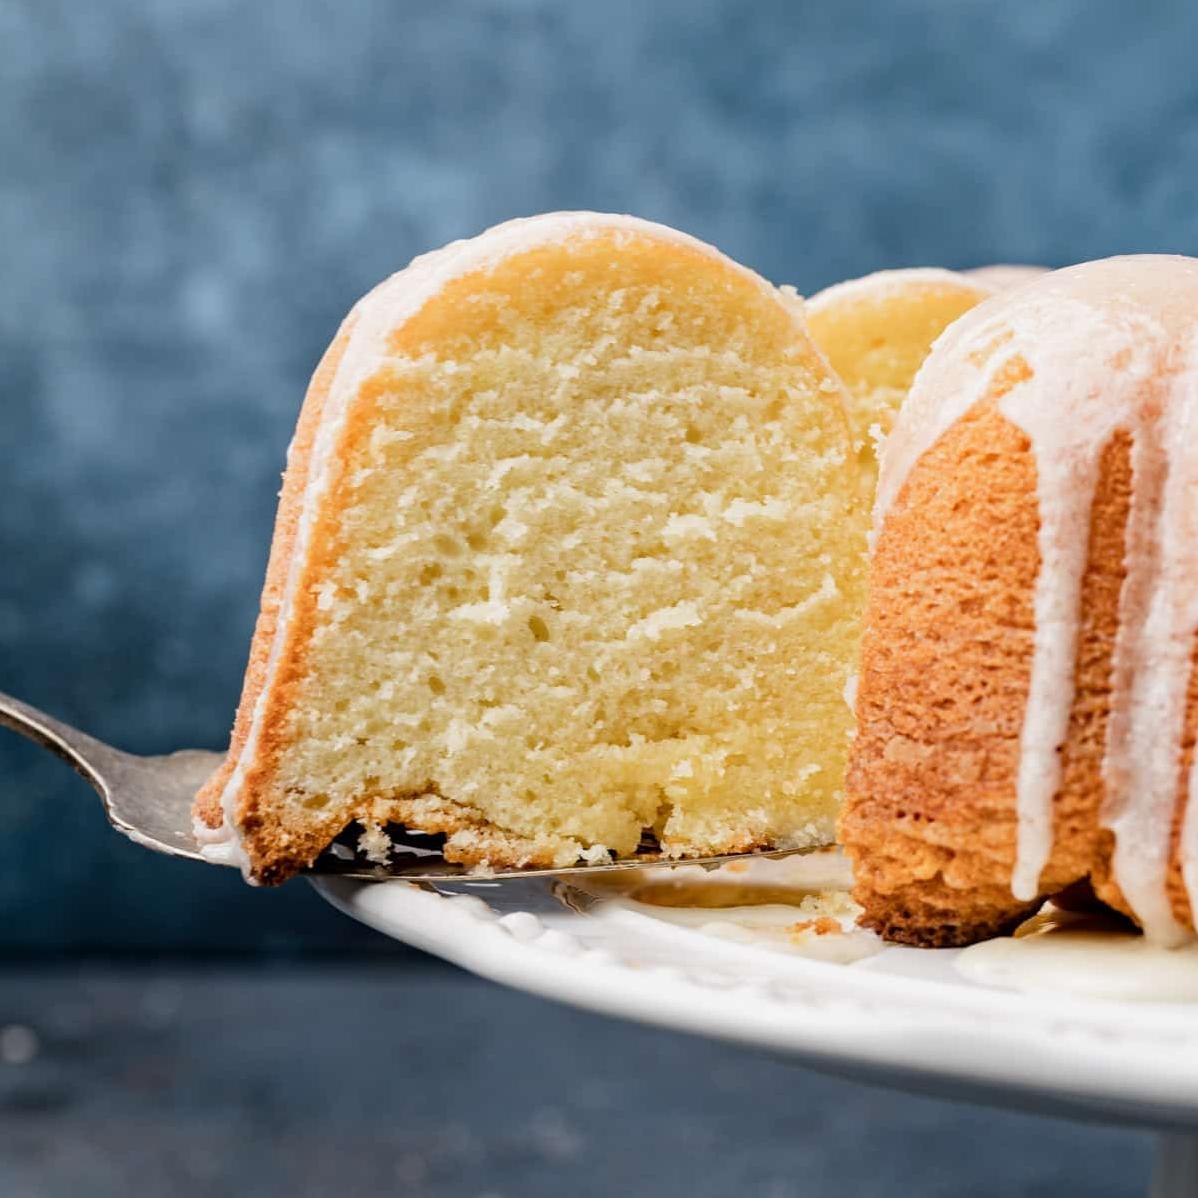  Indulge in a rich and moist pound cake